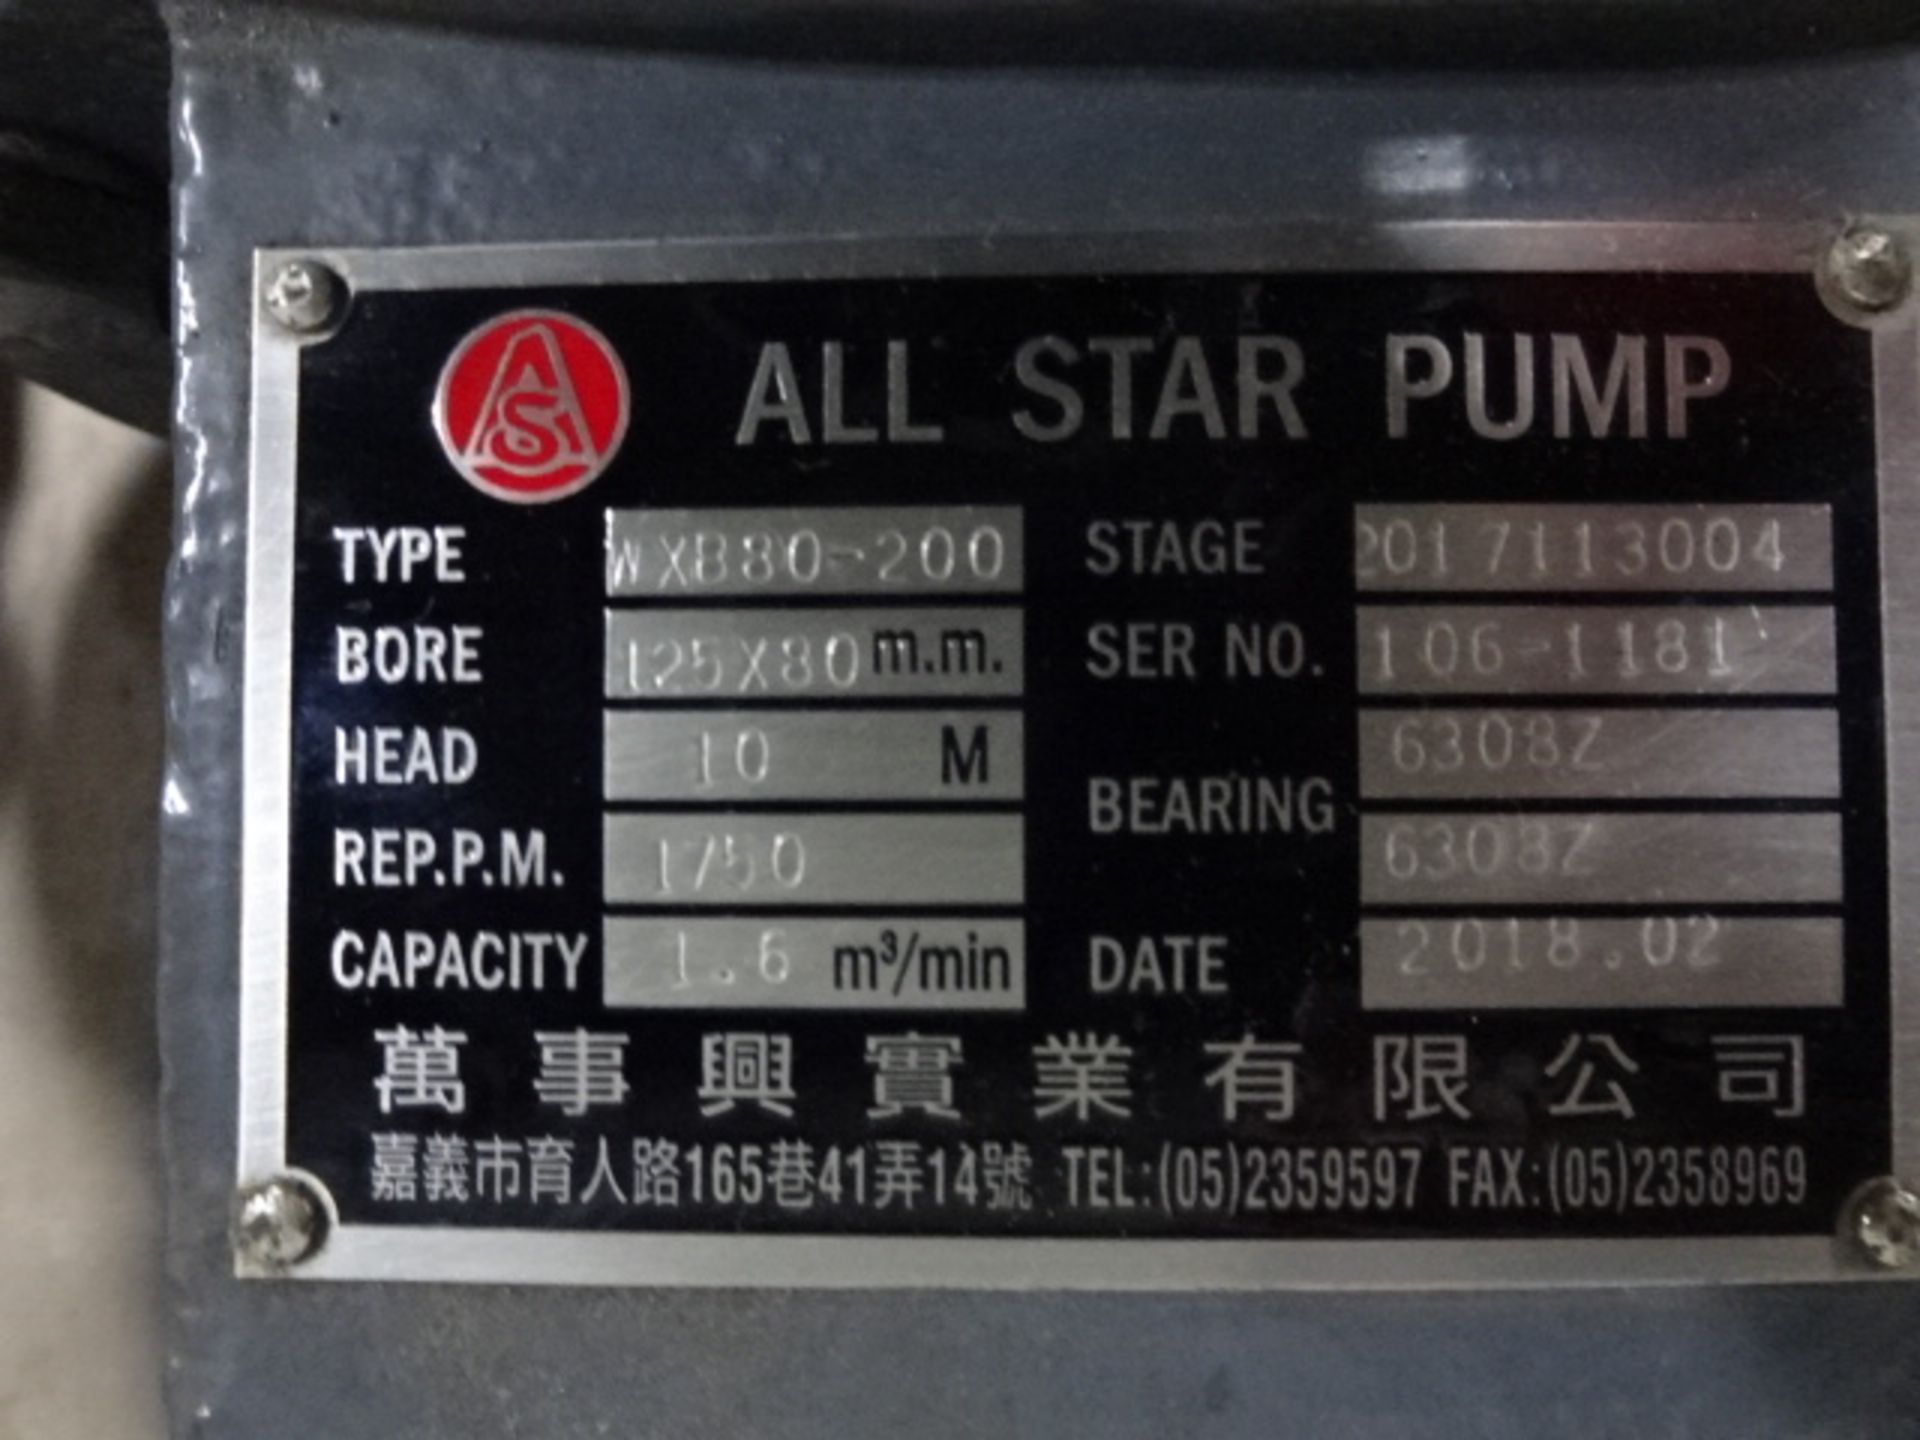 All Star Transfer Pump - Image 2 of 2